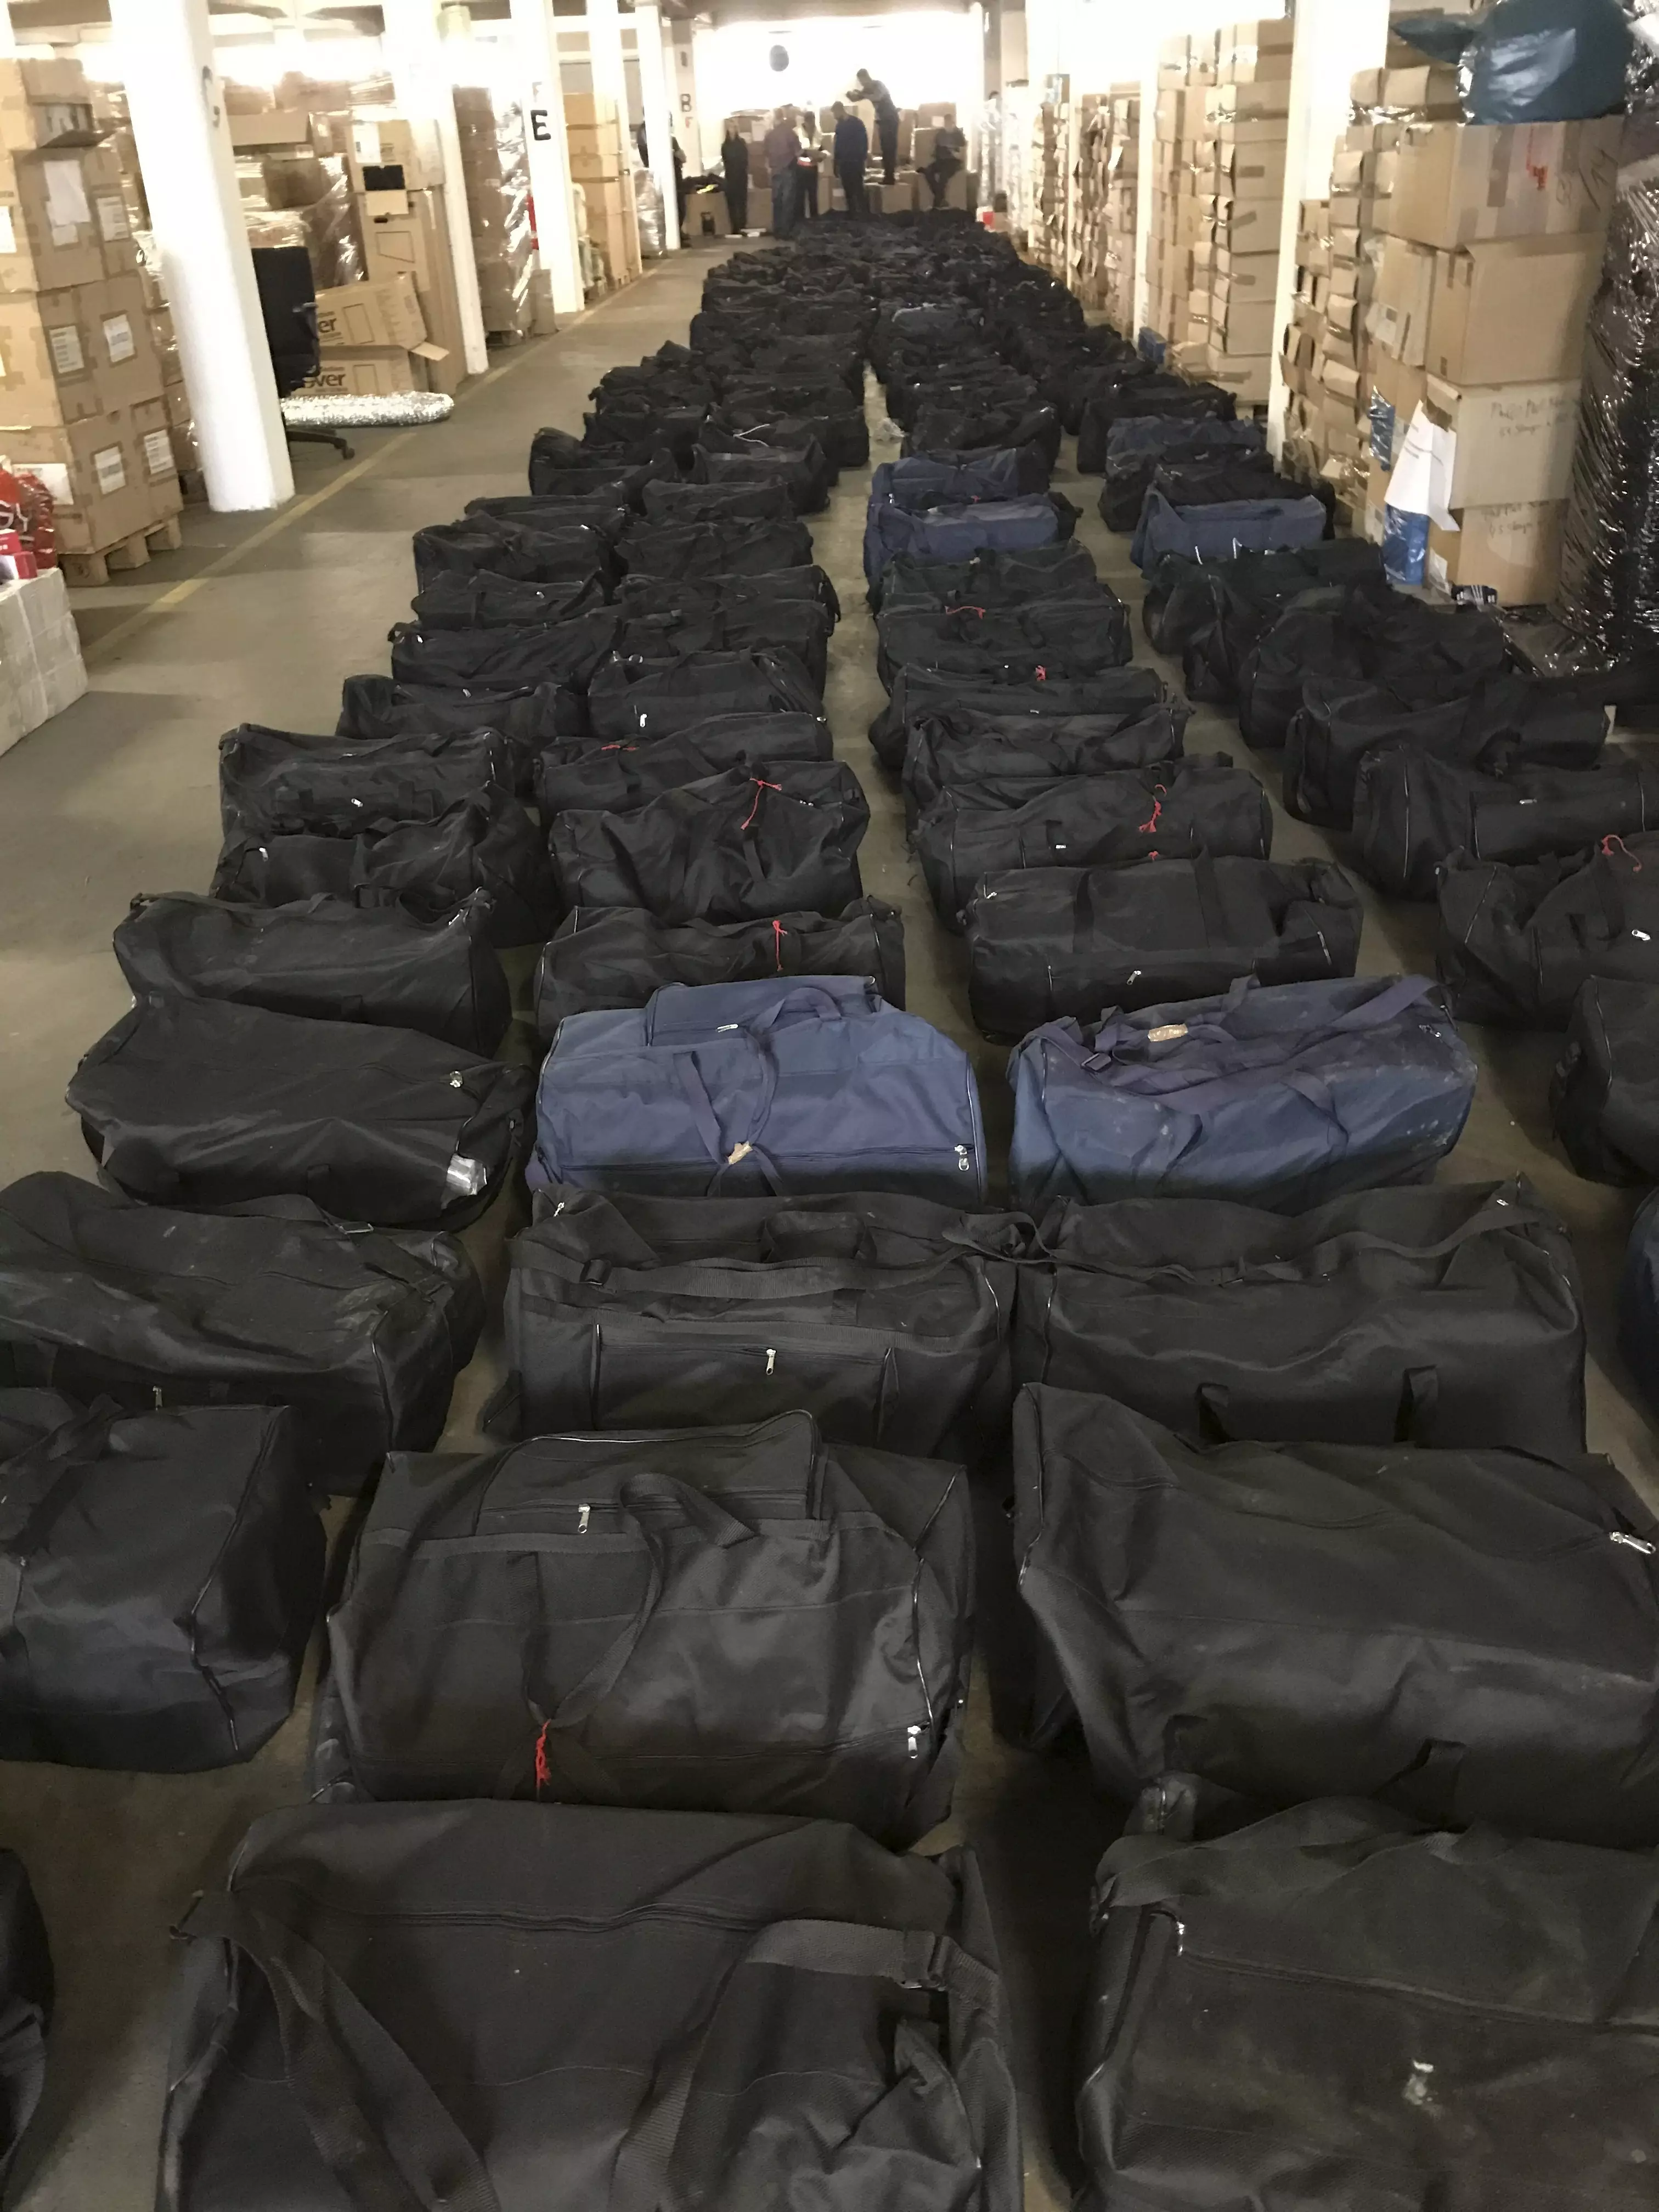 Customs officers found 211 sports bags packed with cocaine.